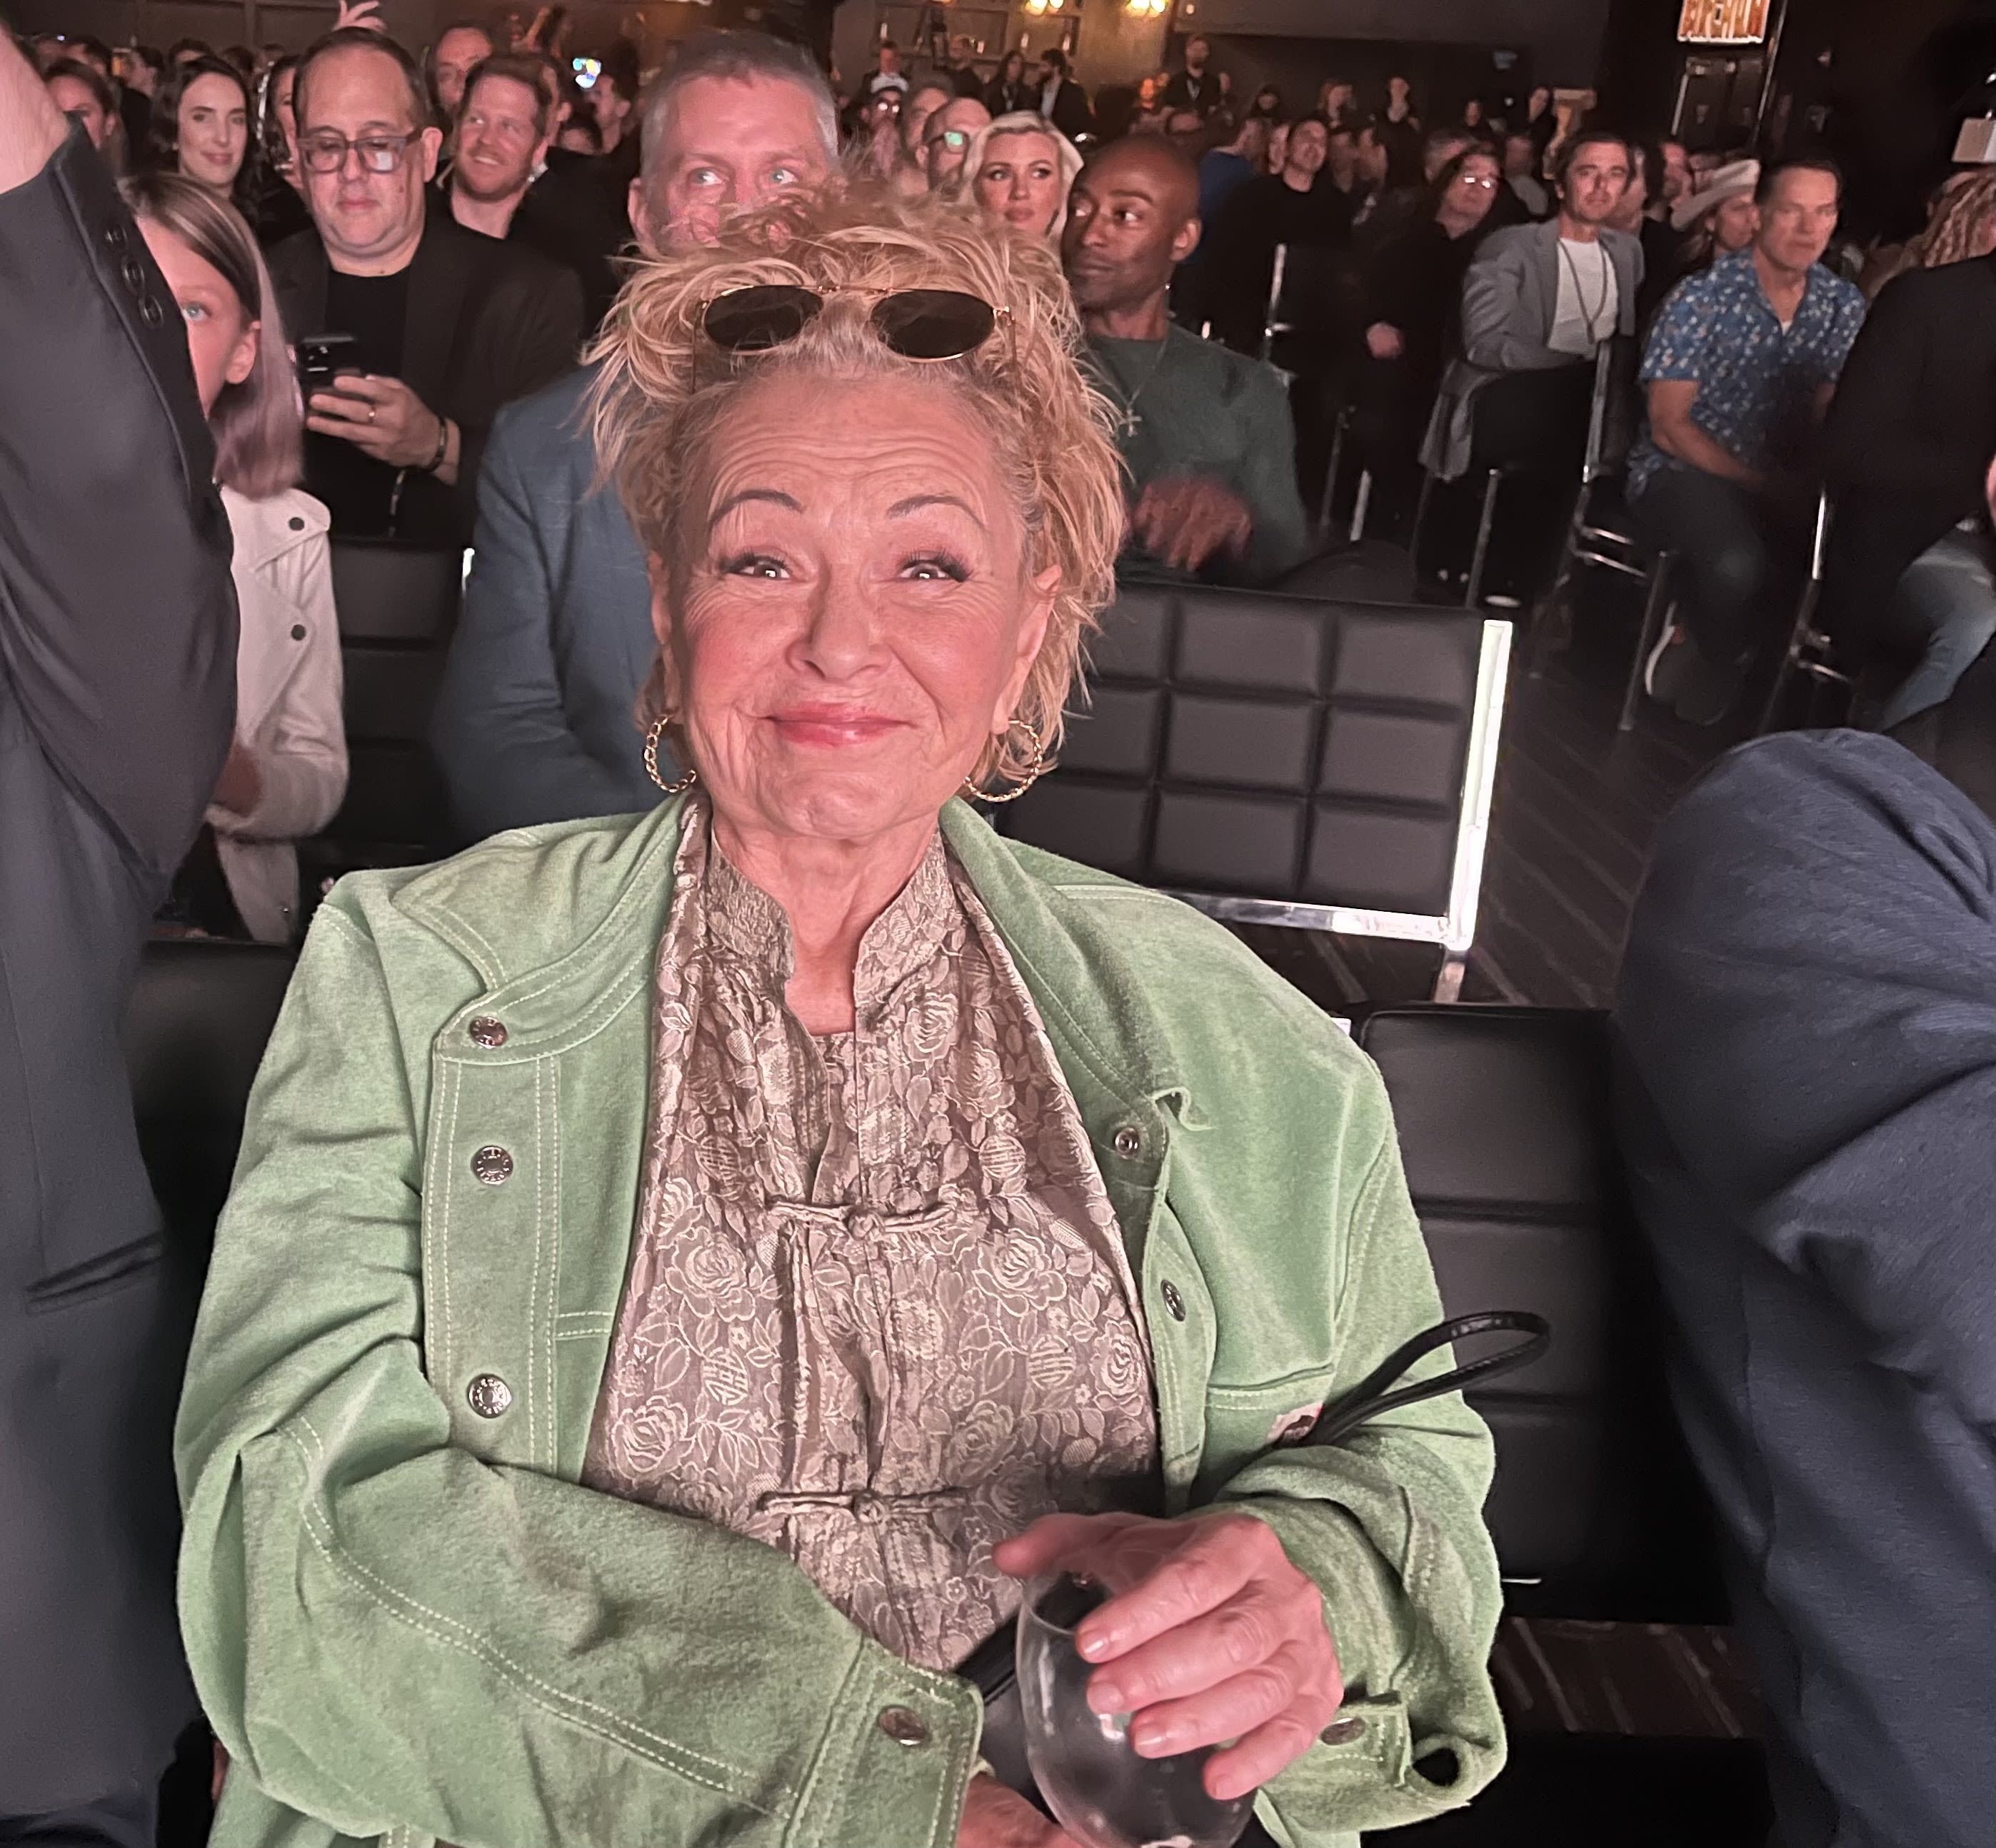 Roseanne Barr unapologetic in rant against ABC, former co-stars and media